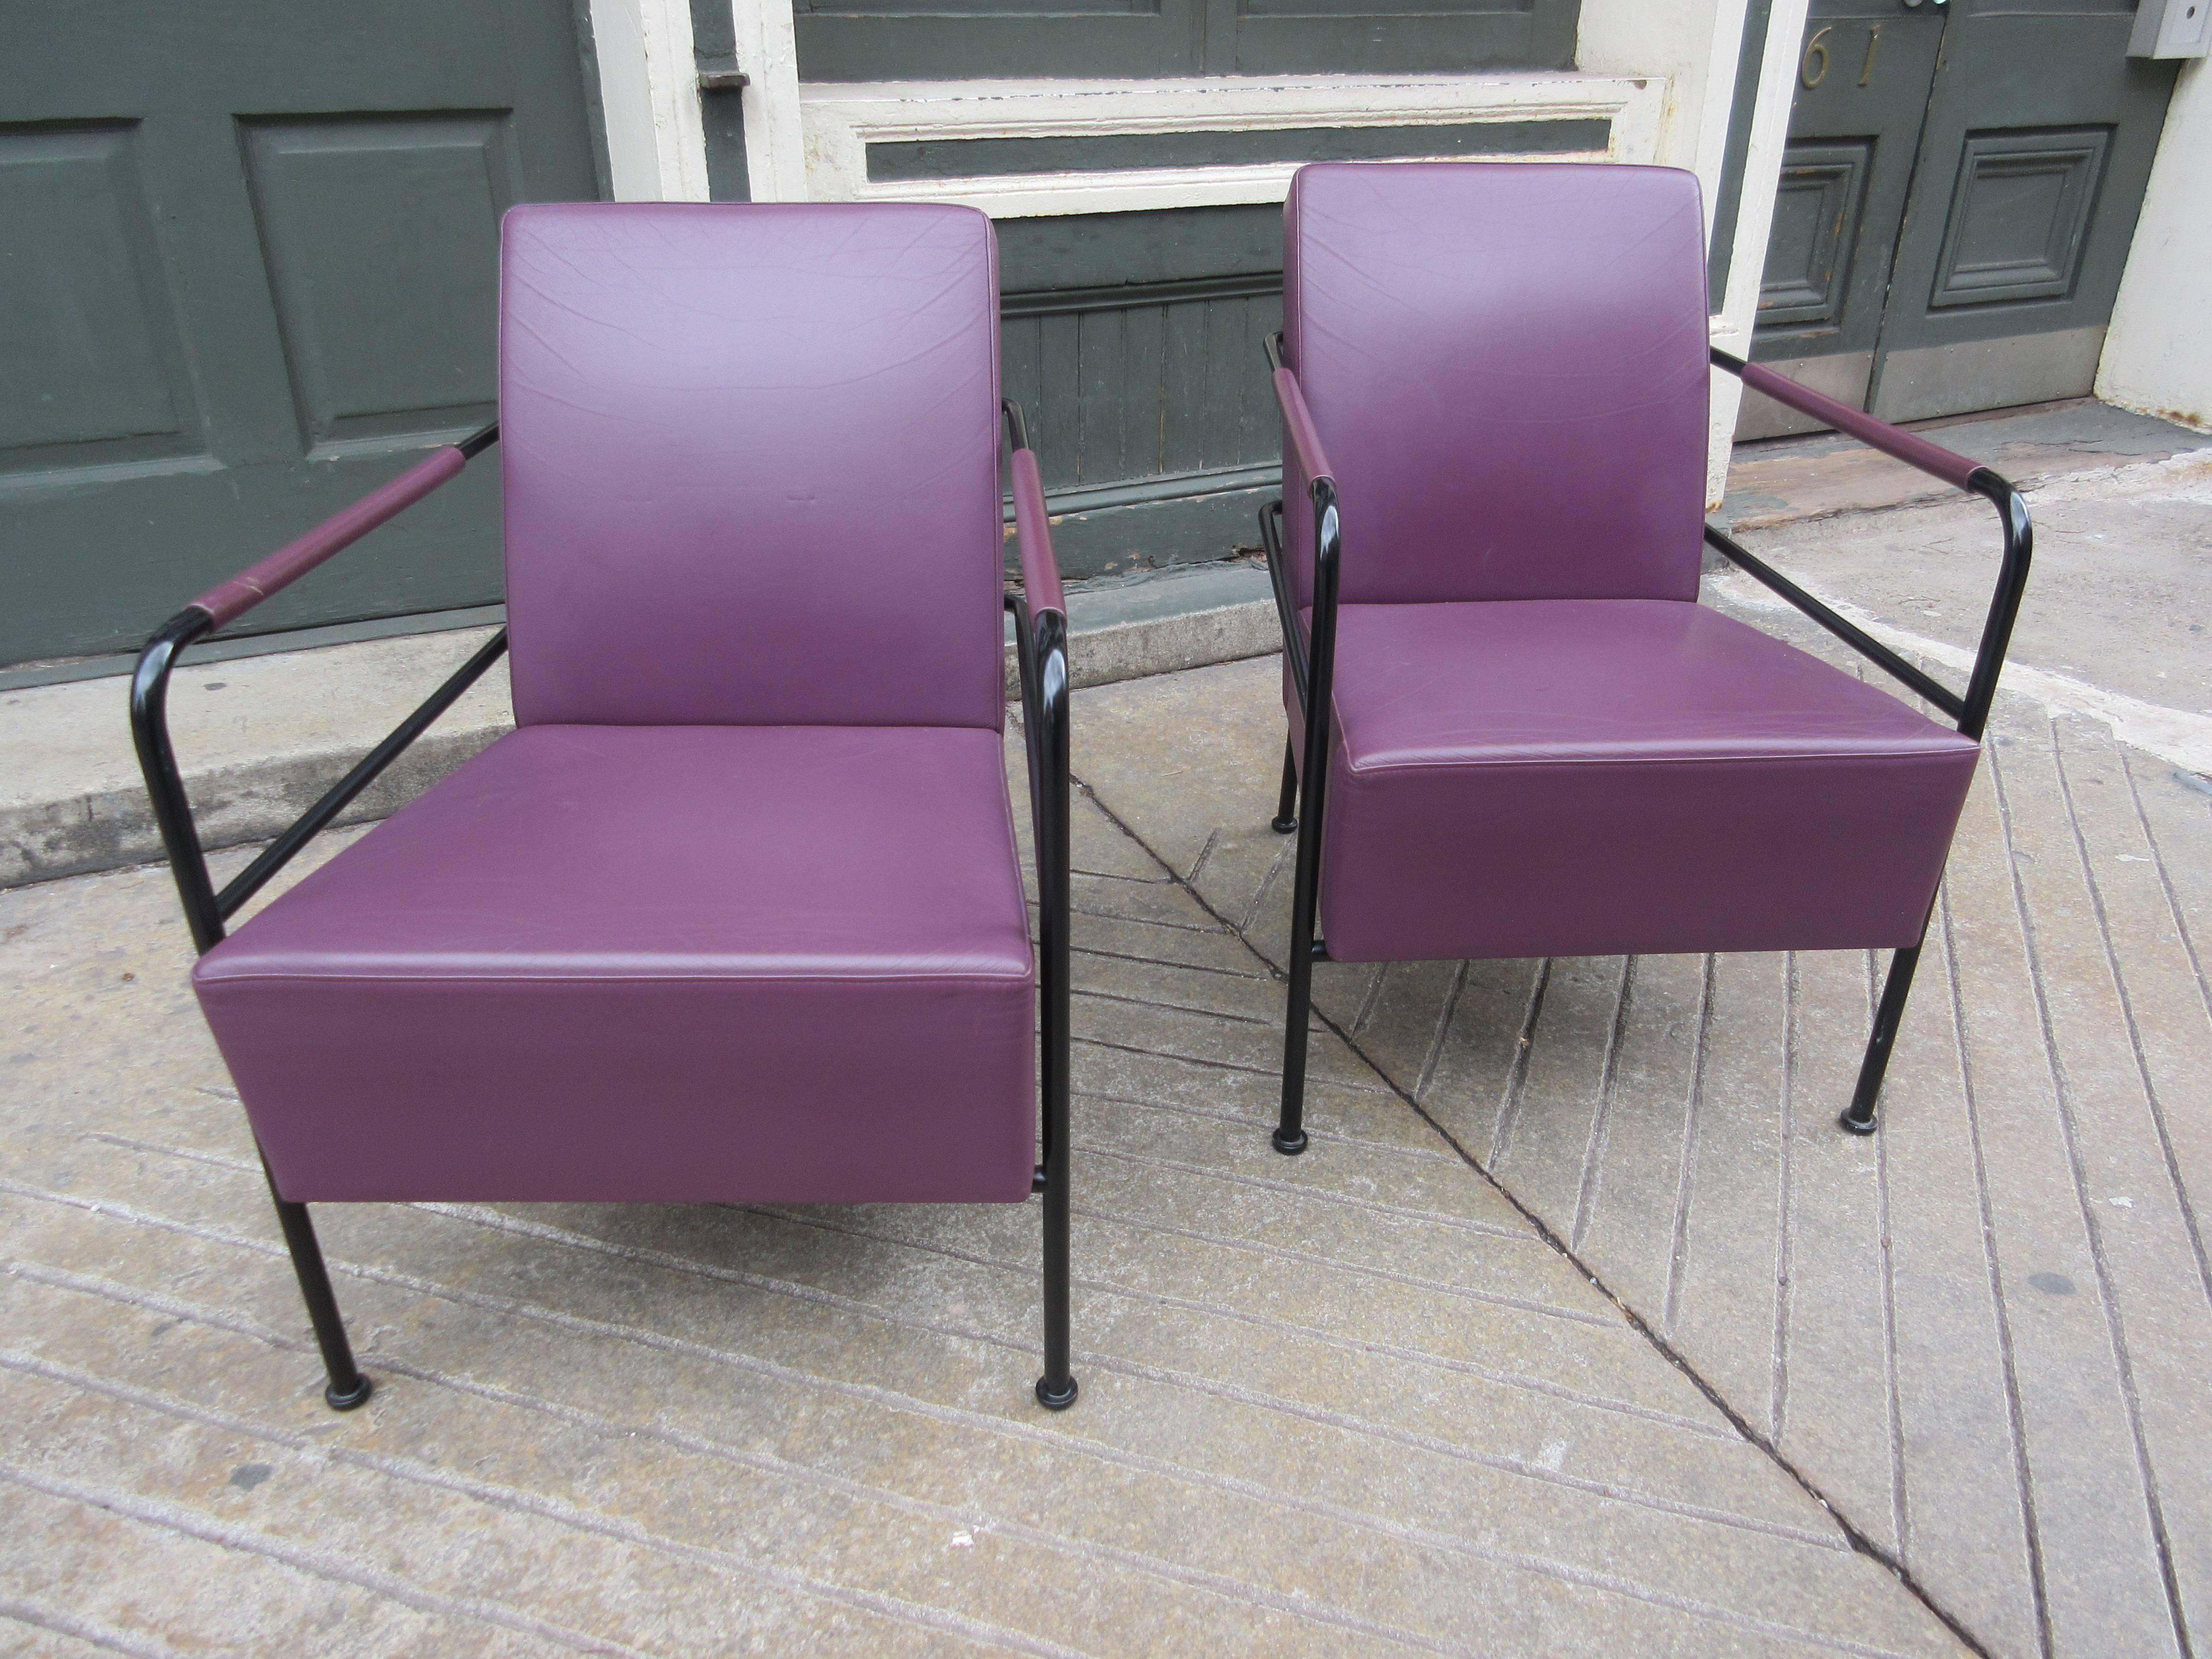 Pairs of petite armchairs in plum leather with painted steel structure and leather wrapped arms. Both chairs have their Lammhults labels.